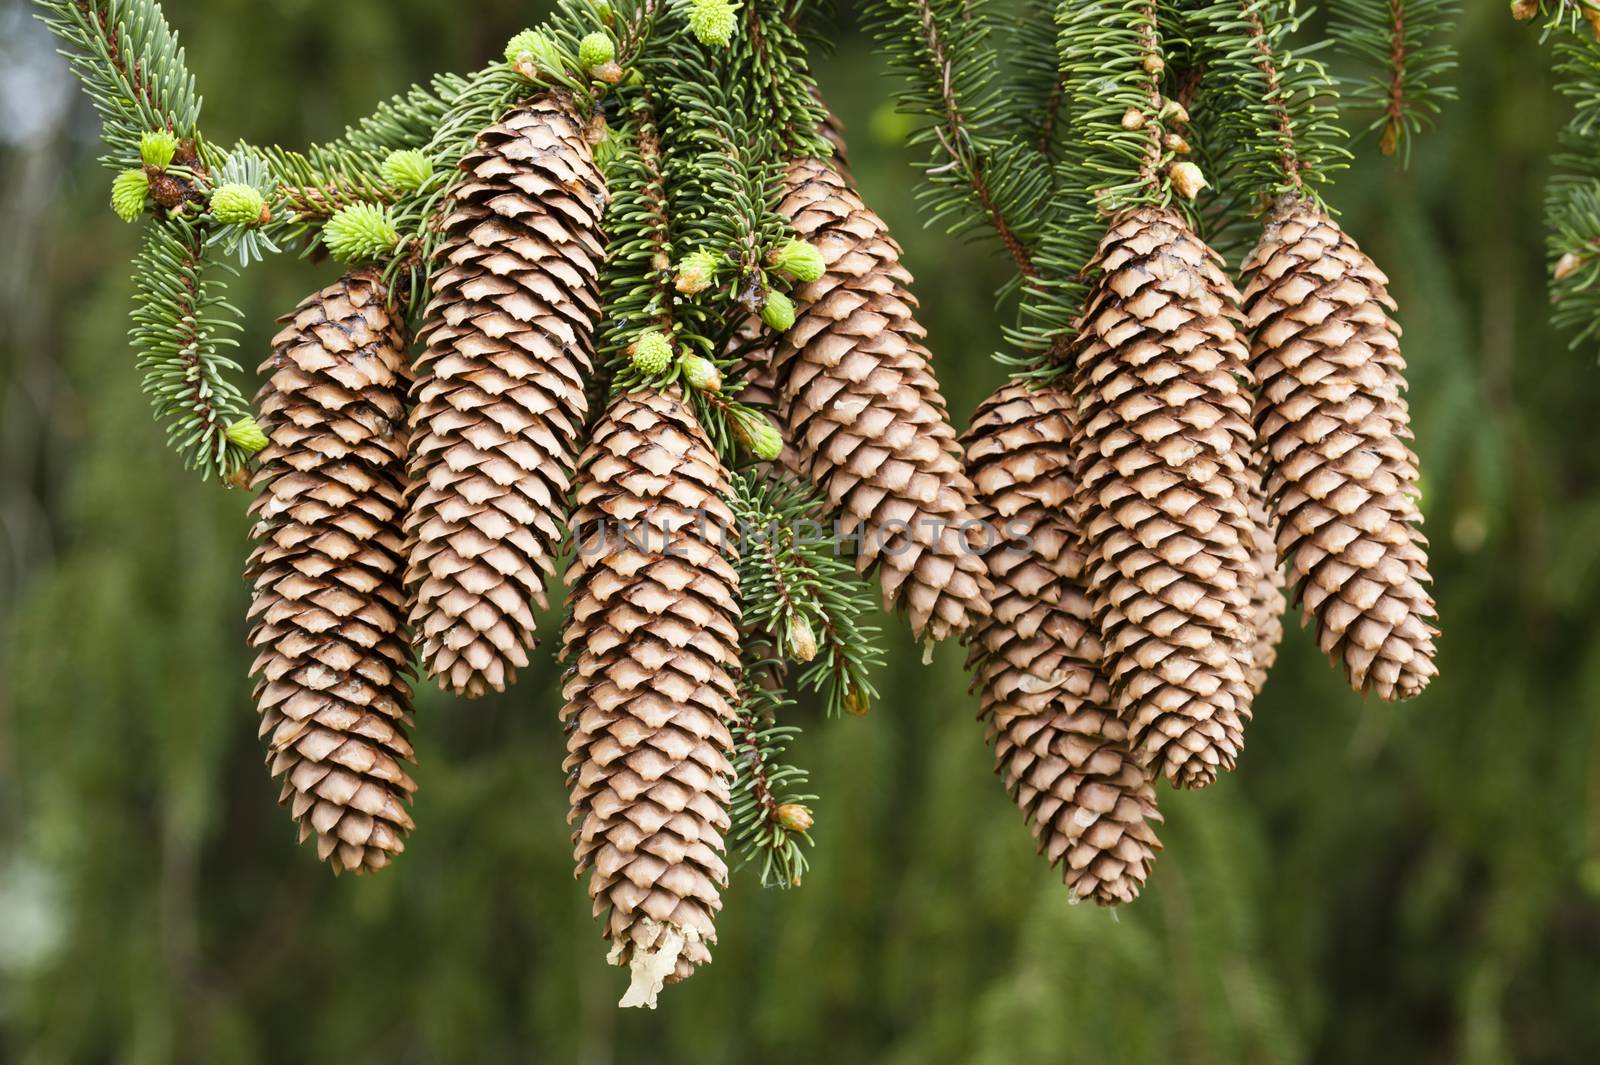 Norway spruce tree with green buds and cones, Picea abies